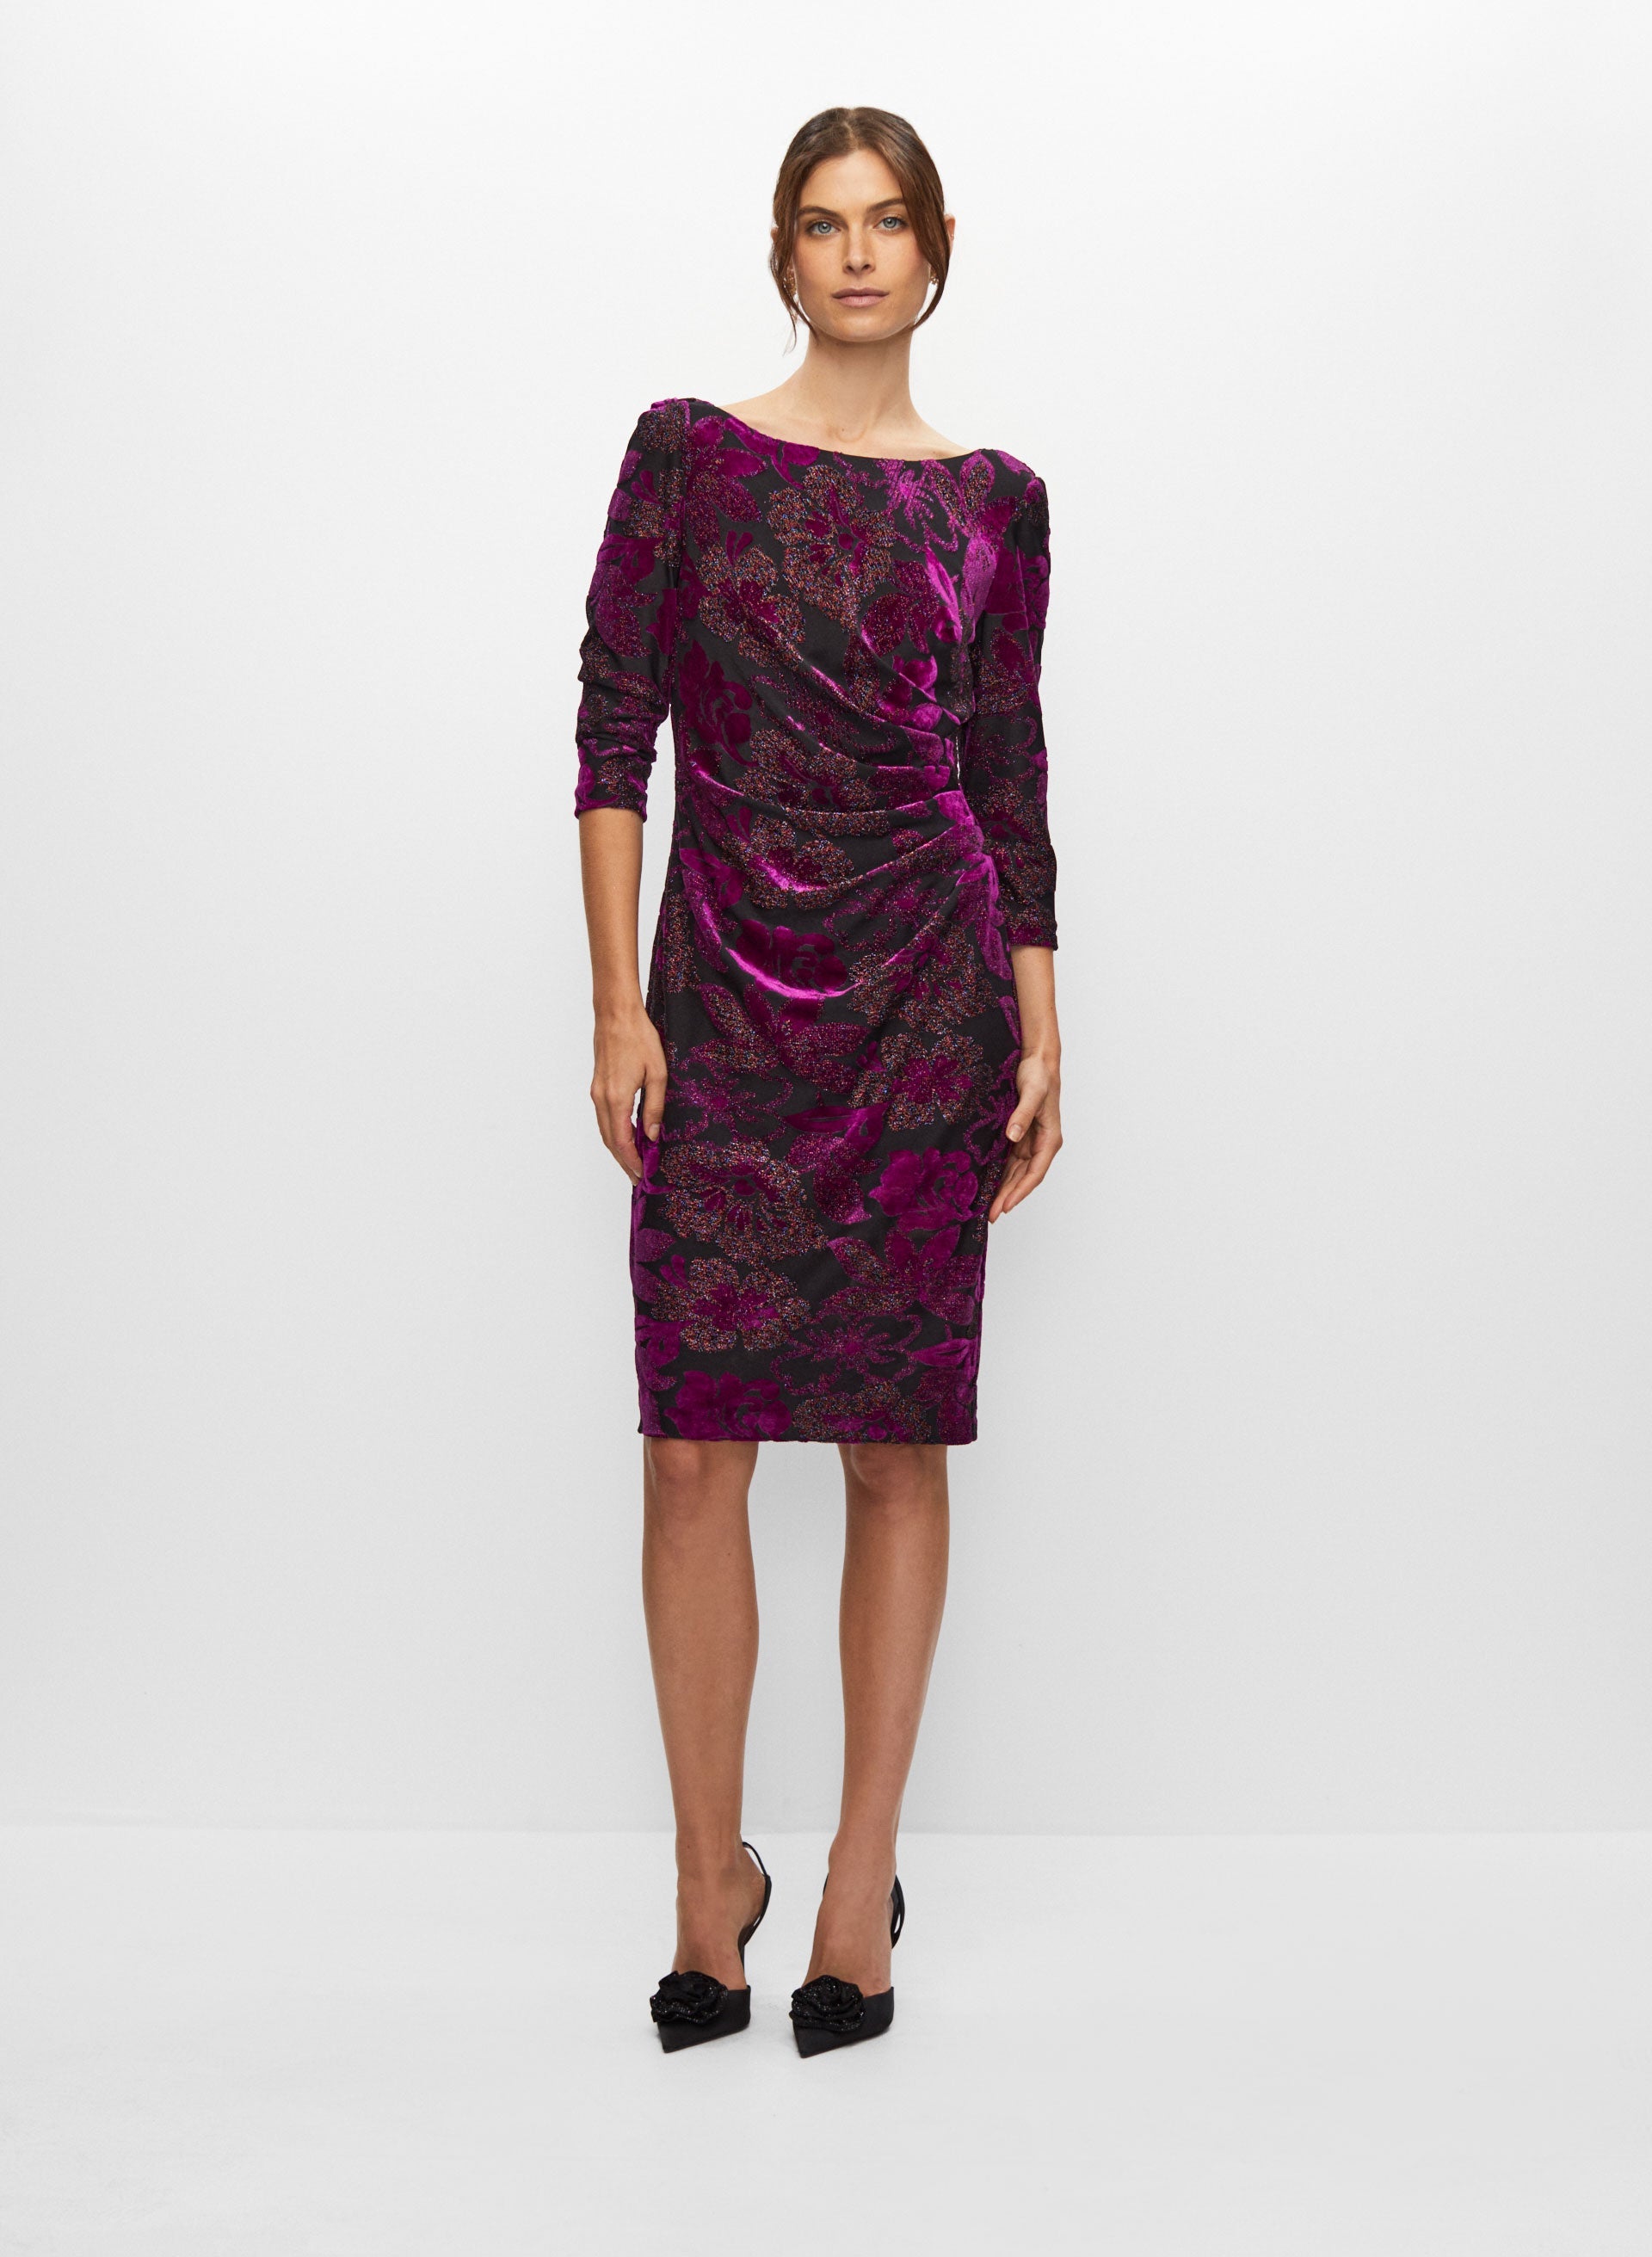 Adrianna Papell - Floral Shimmer Dress